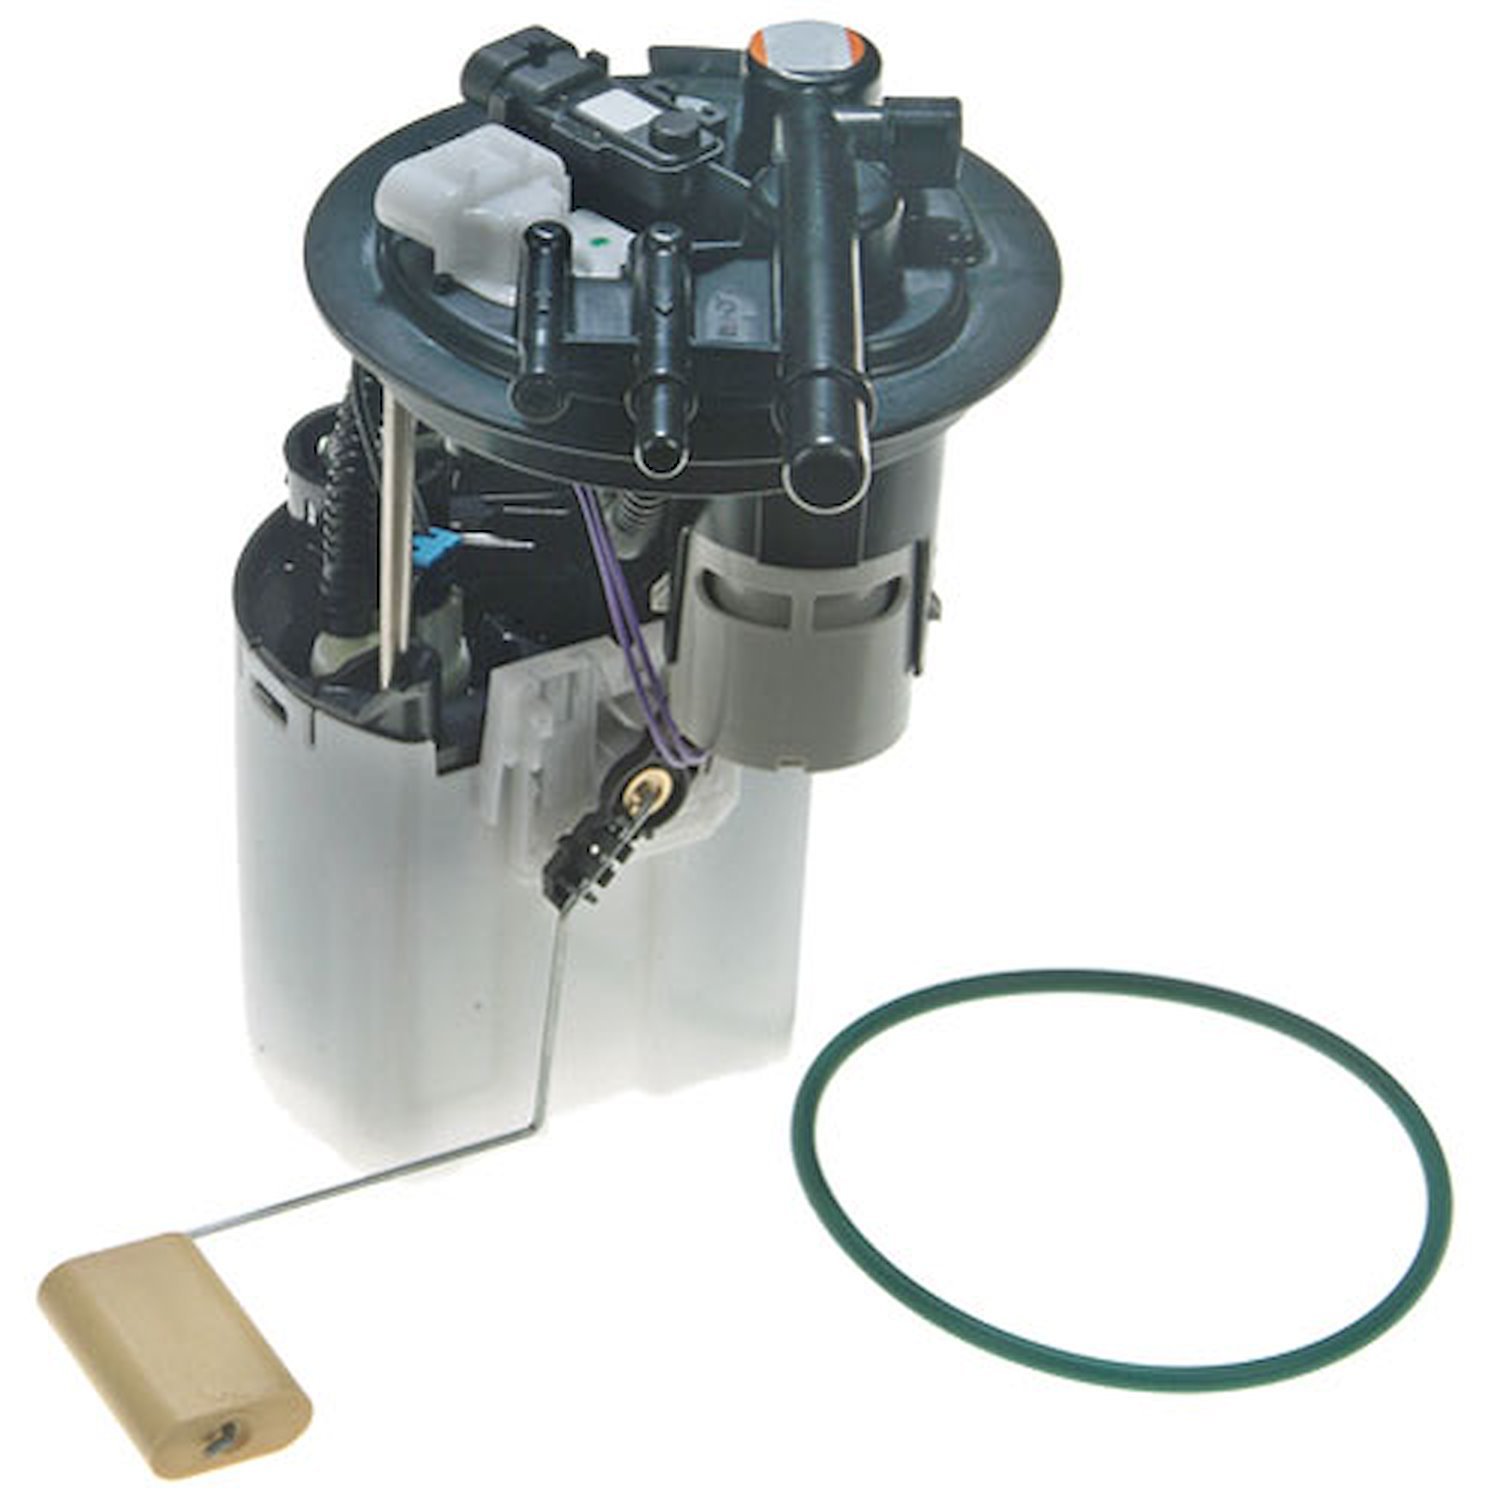 OE GM Replacement Electric Fuel Pump Module Assembly 2006-07 Chevrolet Uplander 3.9L V6/3.5L V6